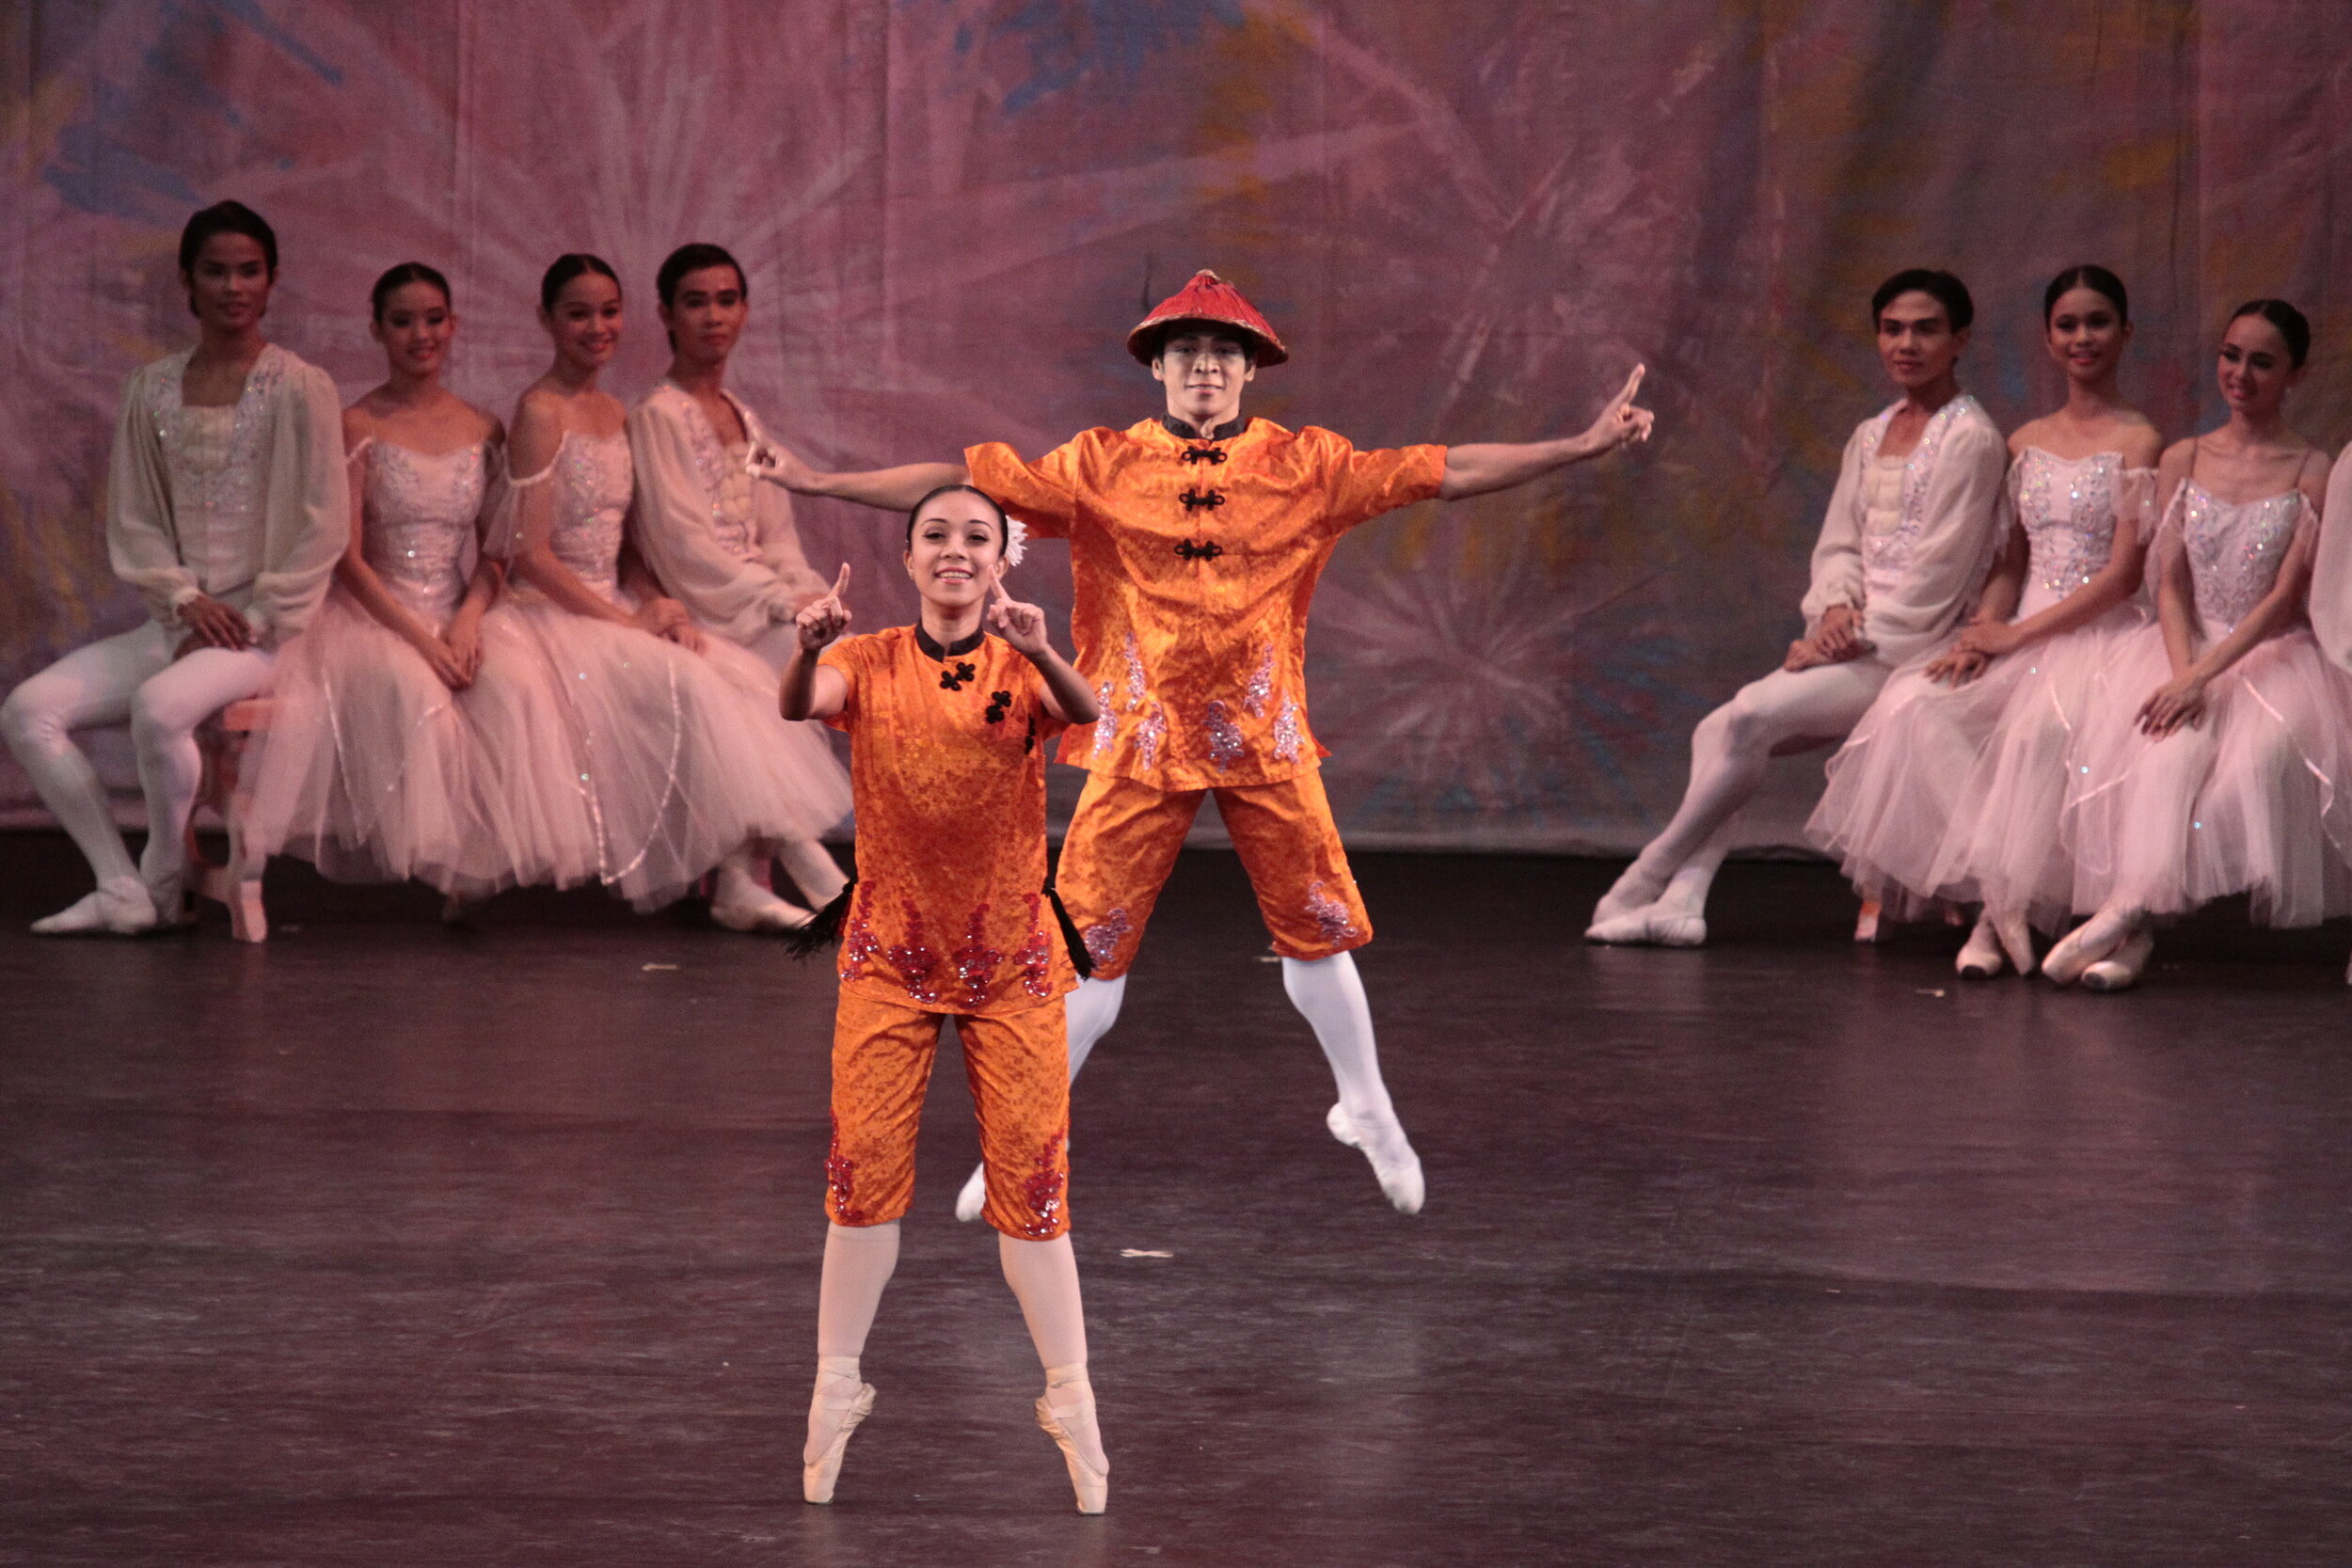    Again cast for the Chinese dance in  The Nutcracker  in 2010, Gerardo Francisco this time partners Mylene Aggabao. Their tunic costumes are the same, still a dazzling orange made even more shimmery with touches of sequins. Photo by Ocs Alvarez   